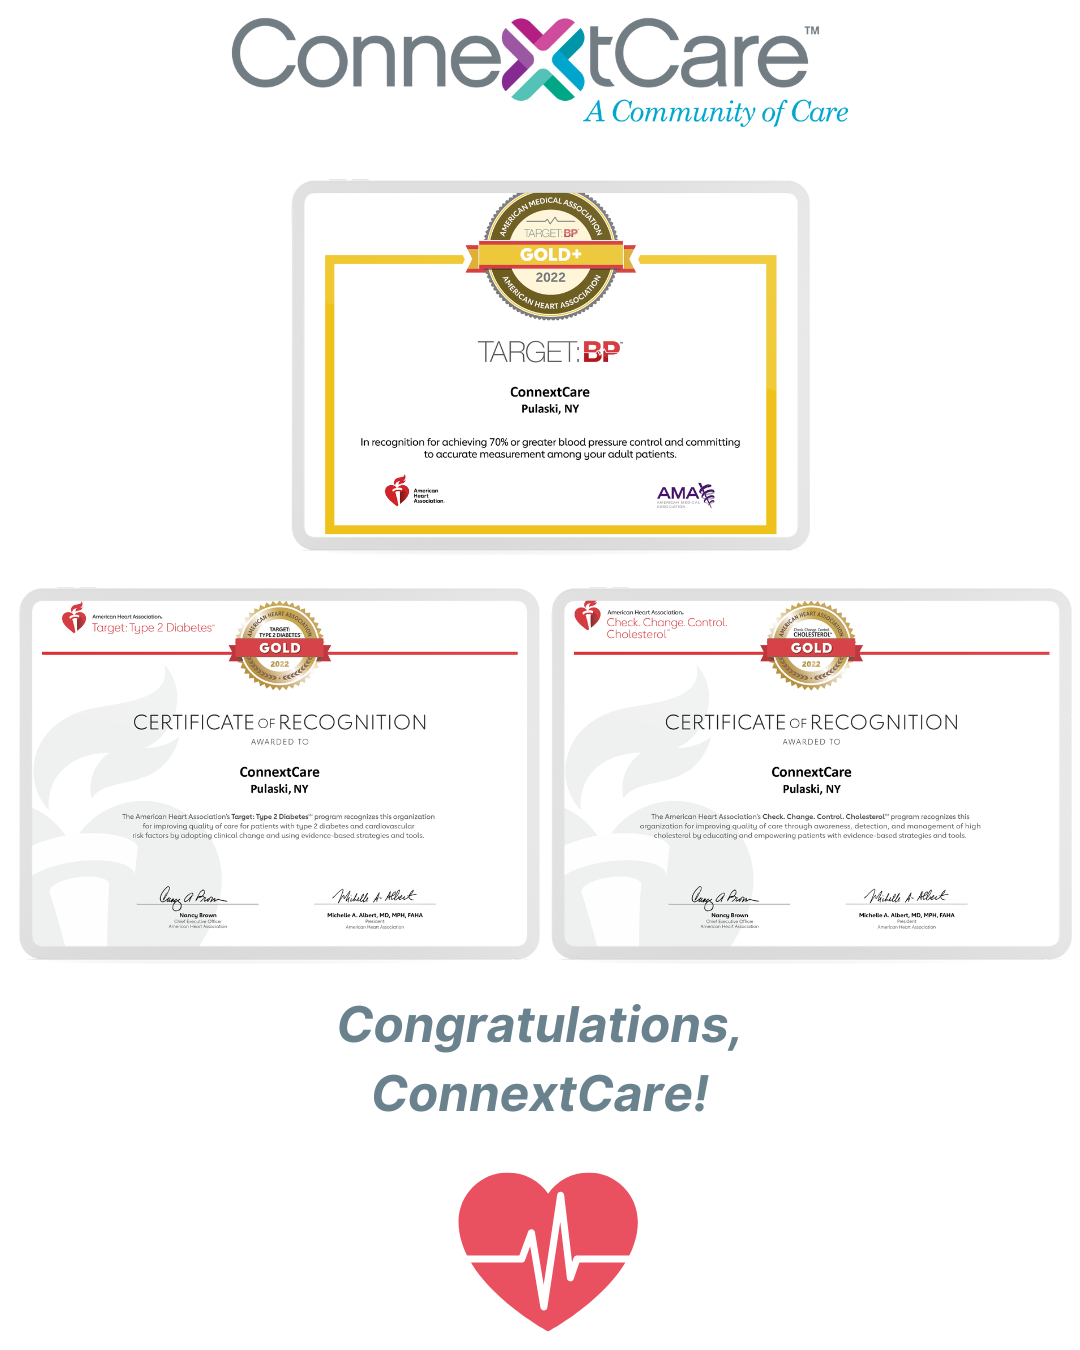 Connextcare Receives Awards from the American Heart Association and American Medical Association Image